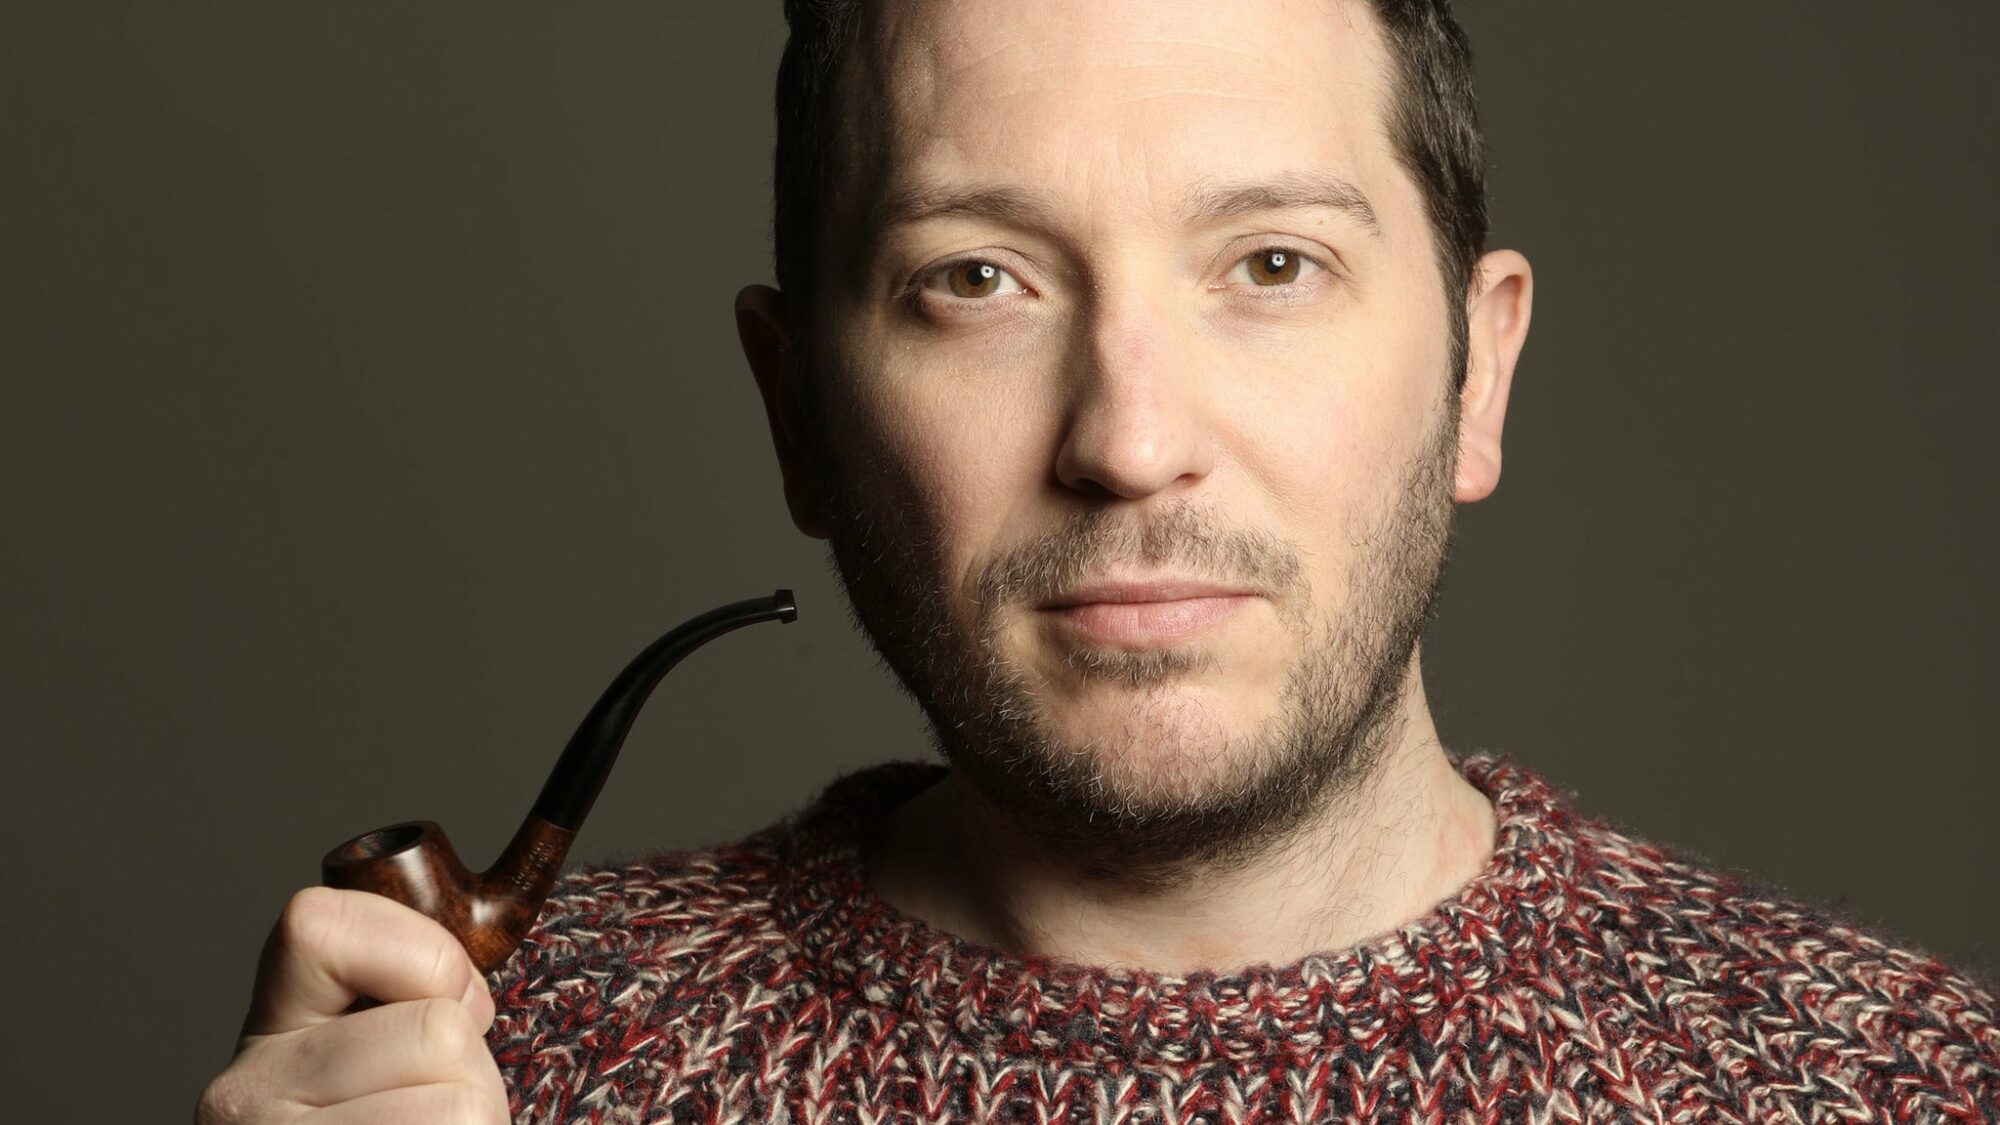 Image name Jon Richardson The Knitwit at Leeds Grand Theatre Leeds the 31 image from the post Jon Richardson: The Knitwit at Sheffield City Hall Oval Hall, Sheffield in Yorkshire.com.